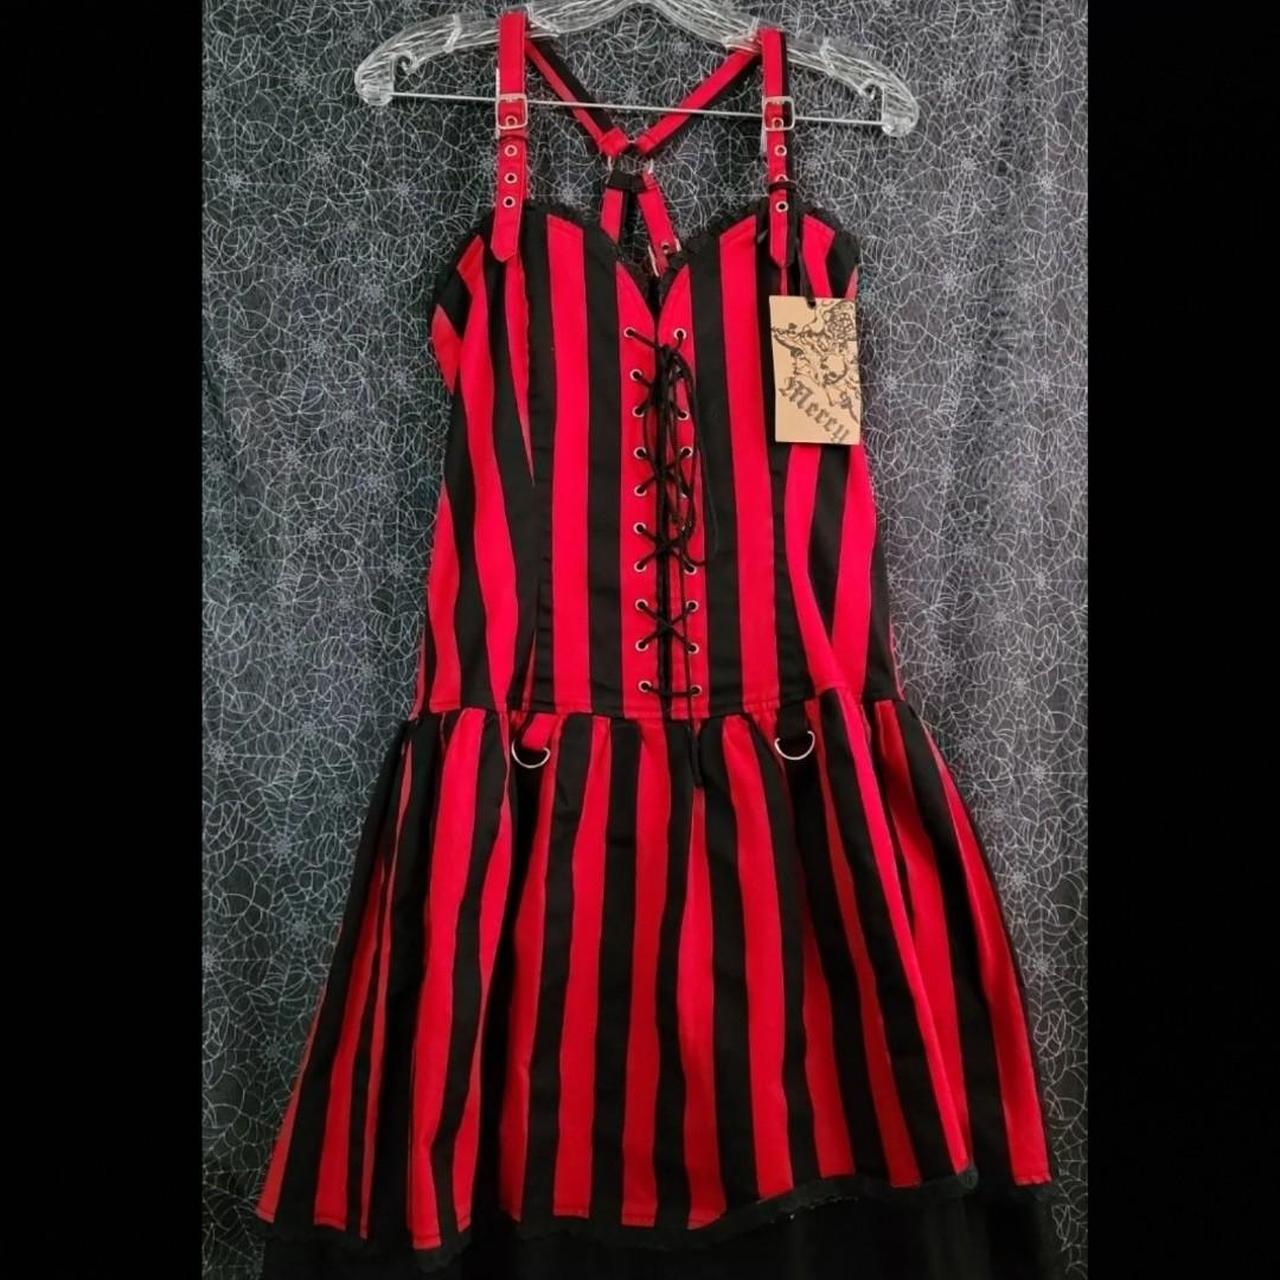 Hot Topic Women's Black and Red Dress